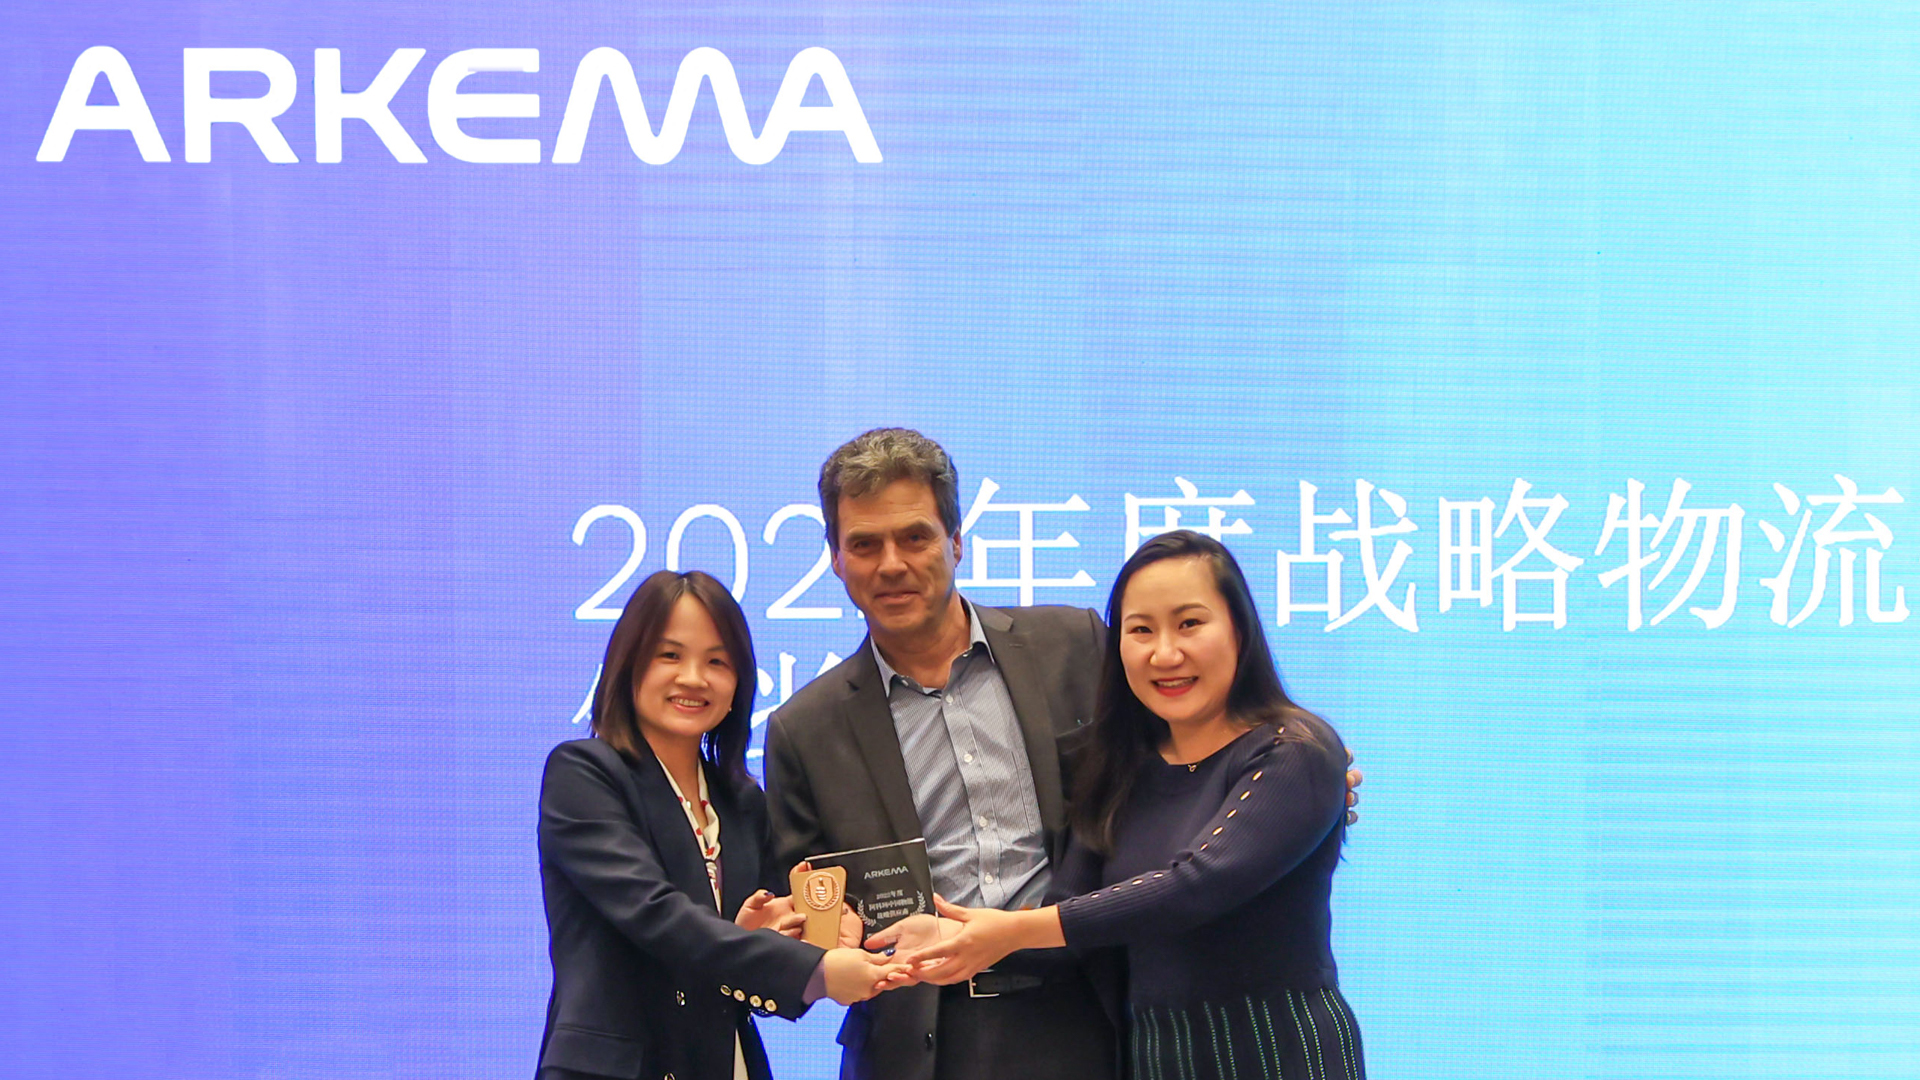 Didier LEBLANC – Regional President Acrylic Monomers Asia presenting the award to GEODIS head of sales and marketing of (Central) China Sally ZHOU (left) and Elva CHEN (GEODIS regional key account manager for the Arkema account in APAC & ME) (right)